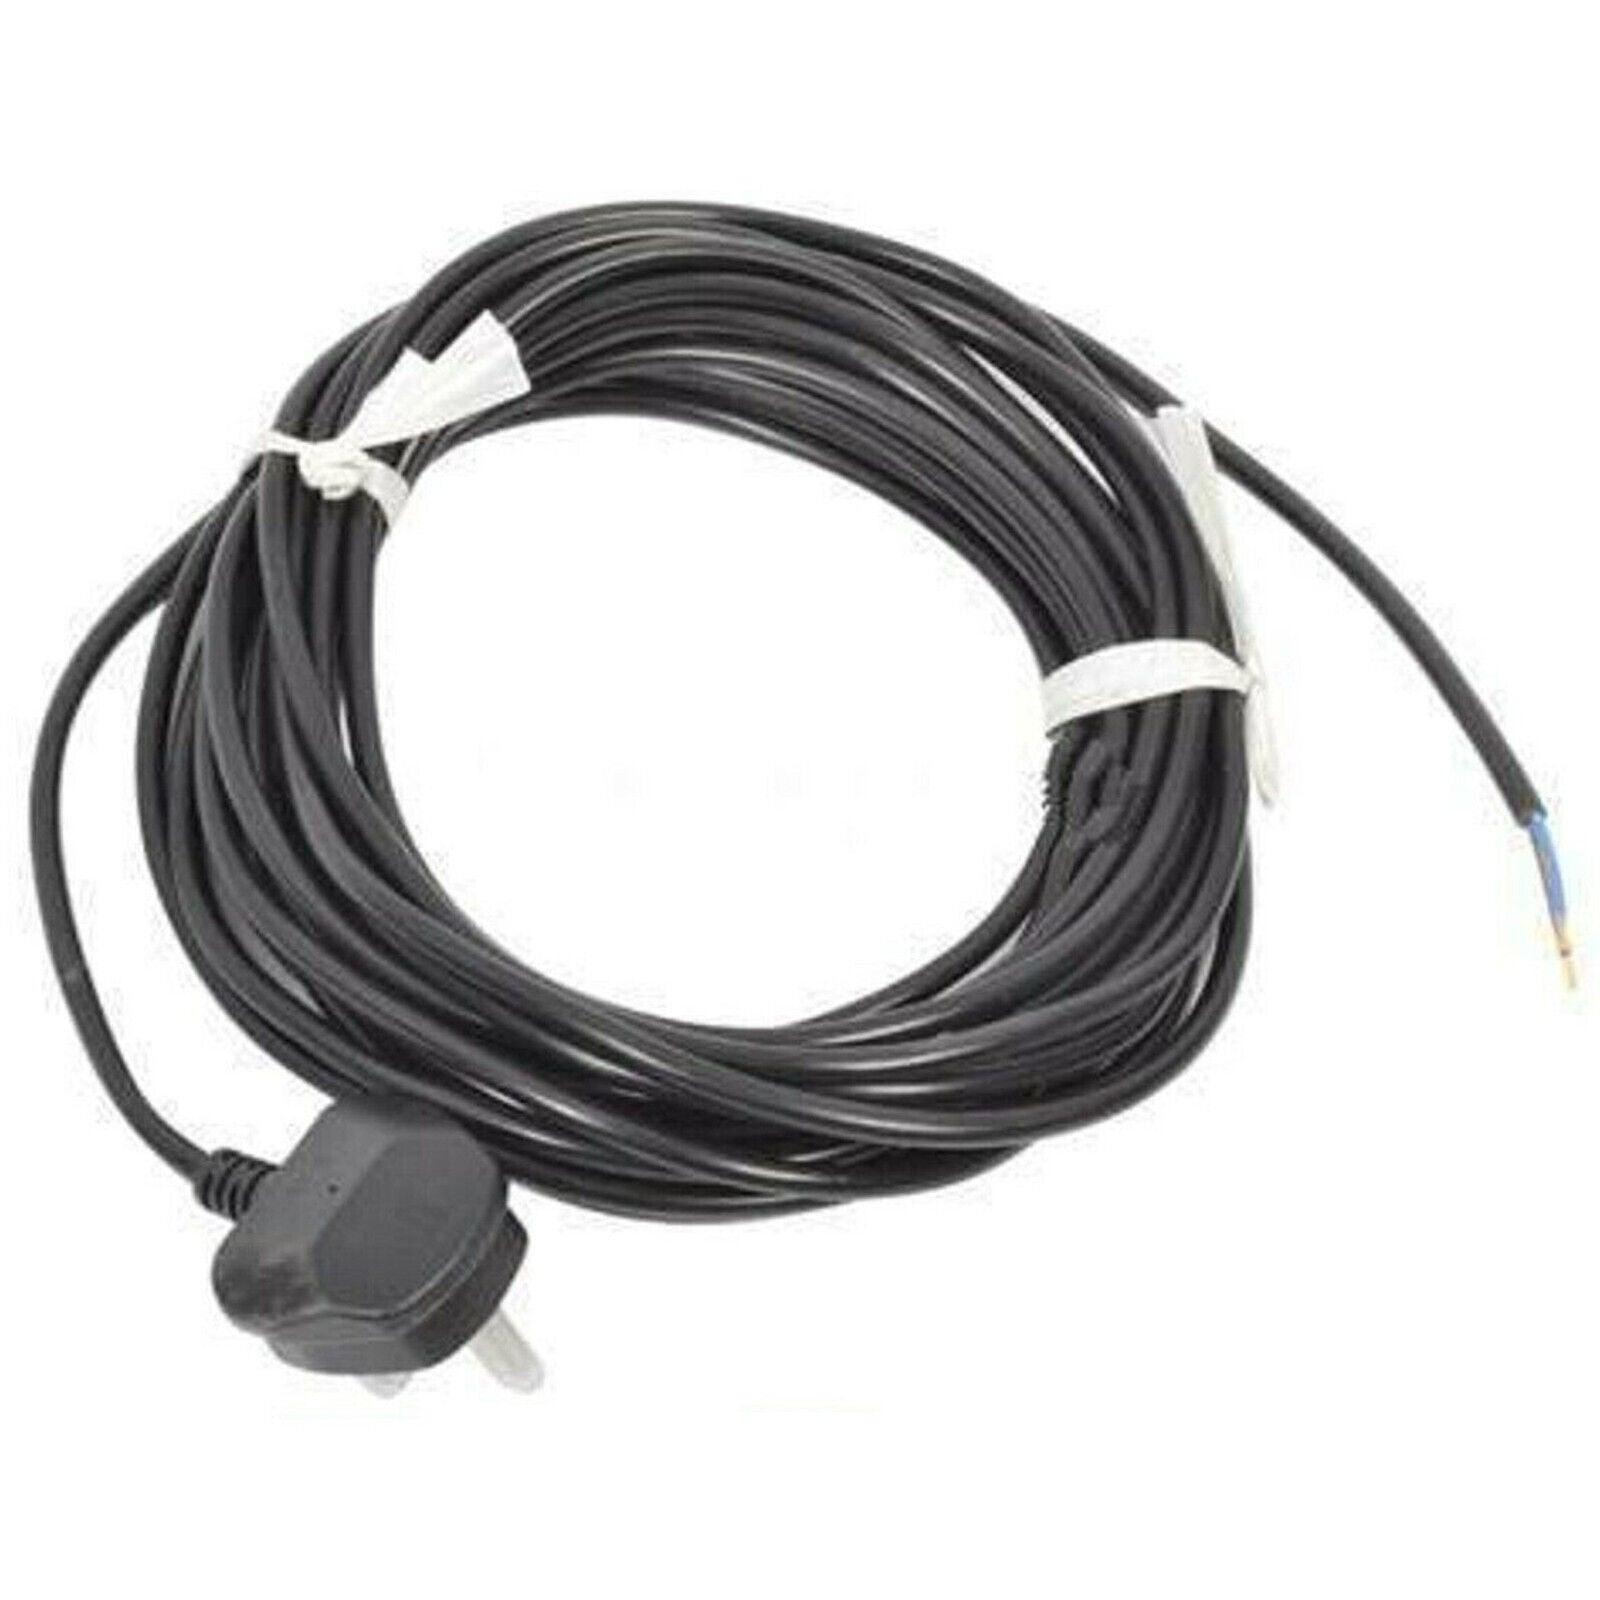 Power Cable for Numatic George & Charles Vacuum Cleaner - Vacuum Cleaner Clinic 